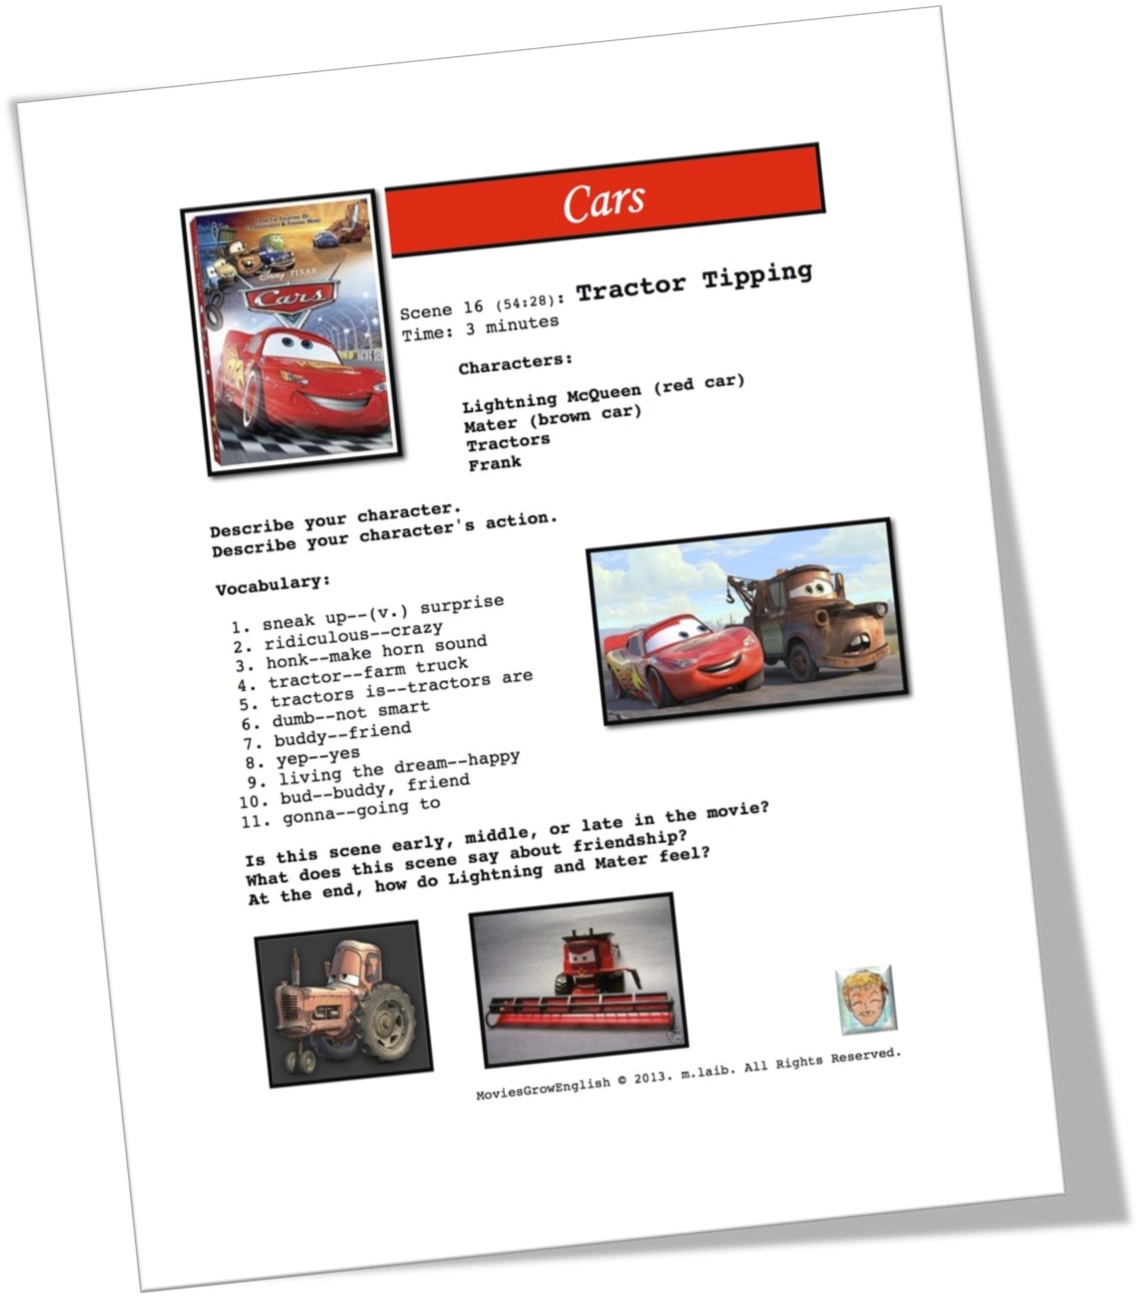 Cars: Short-Sequence ESL Movie Lesson, Tractor Tipping at Movies Grow English